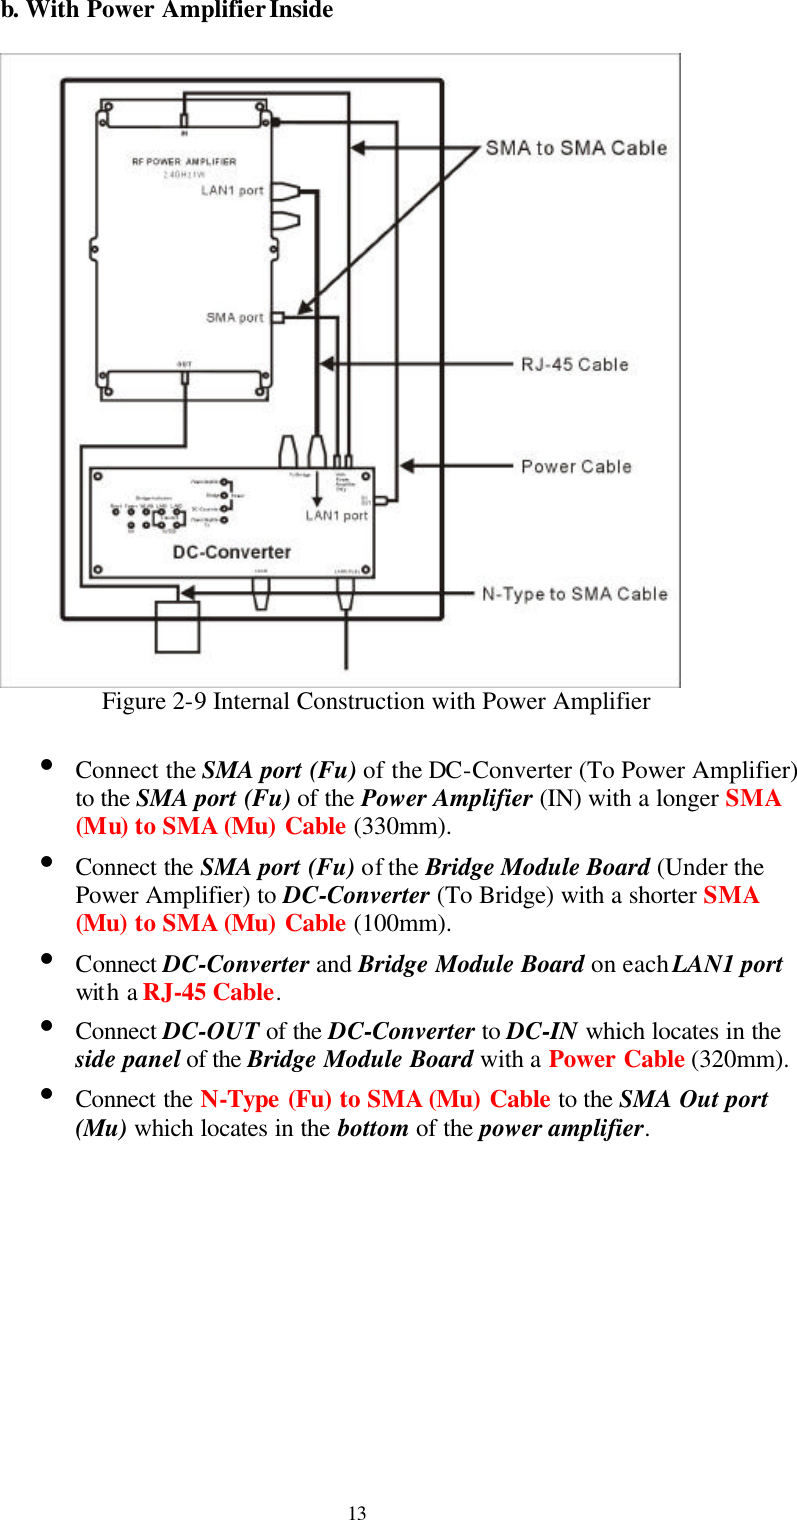  13 b. With Power Amplifier Inside   Figure 2-9 Internal Construction with Power Amplifier  Ÿ Connect the SMA port (Fu) of the DC-Converter (To Power Amplifier) to the SMA port (Fu) of the Power Amplifier (IN) with a longer SMA (Mu) to SMA (Mu) Cable (330mm). Ÿ Connect the SMA port (Fu) of the Bridge Module Board (Under the Power Amplifier) to DC-Converter (To Bridge) with a shorter SMA (Mu) to SMA (Mu) Cable (100mm). Ÿ Connect DC-Converter and Bridge Module Board on each LAN1 port with a RJ-45 Cable. Ÿ Connect DC-OUT of the DC-Converter to DC-IN which locates in the side panel of the Bridge Module Board with a Power Cable (320mm). Ÿ Connect the N-Type (Fu) to SMA (Mu) Cable to the SMA Out port (Mu) which locates in the bottom of the power amplifier.           